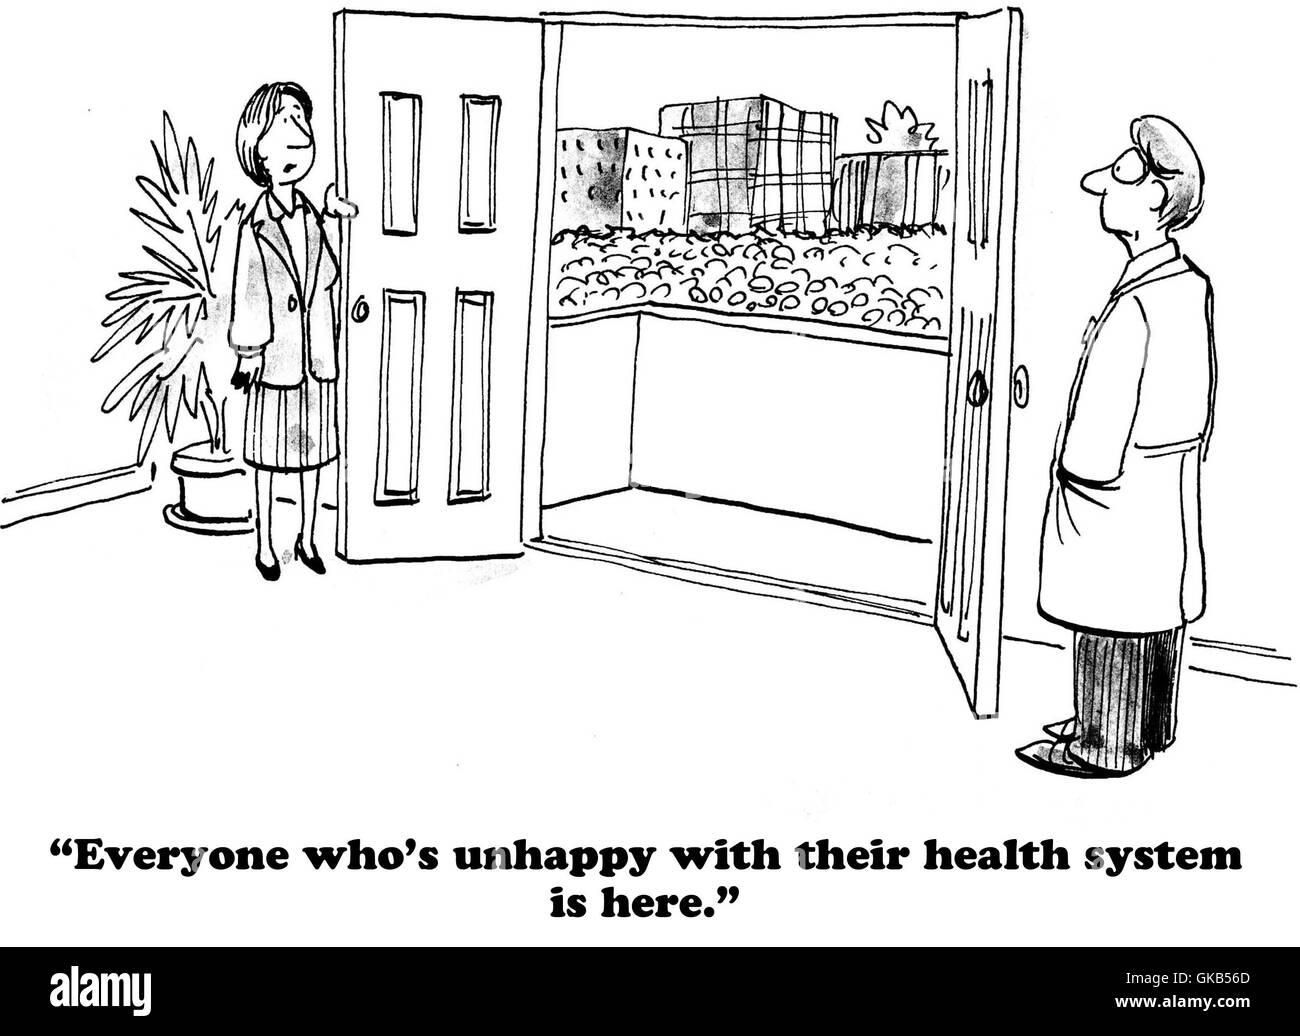 Medical insurance cartoon about the many people unhappy with nationalized health insurance. Stock Photo